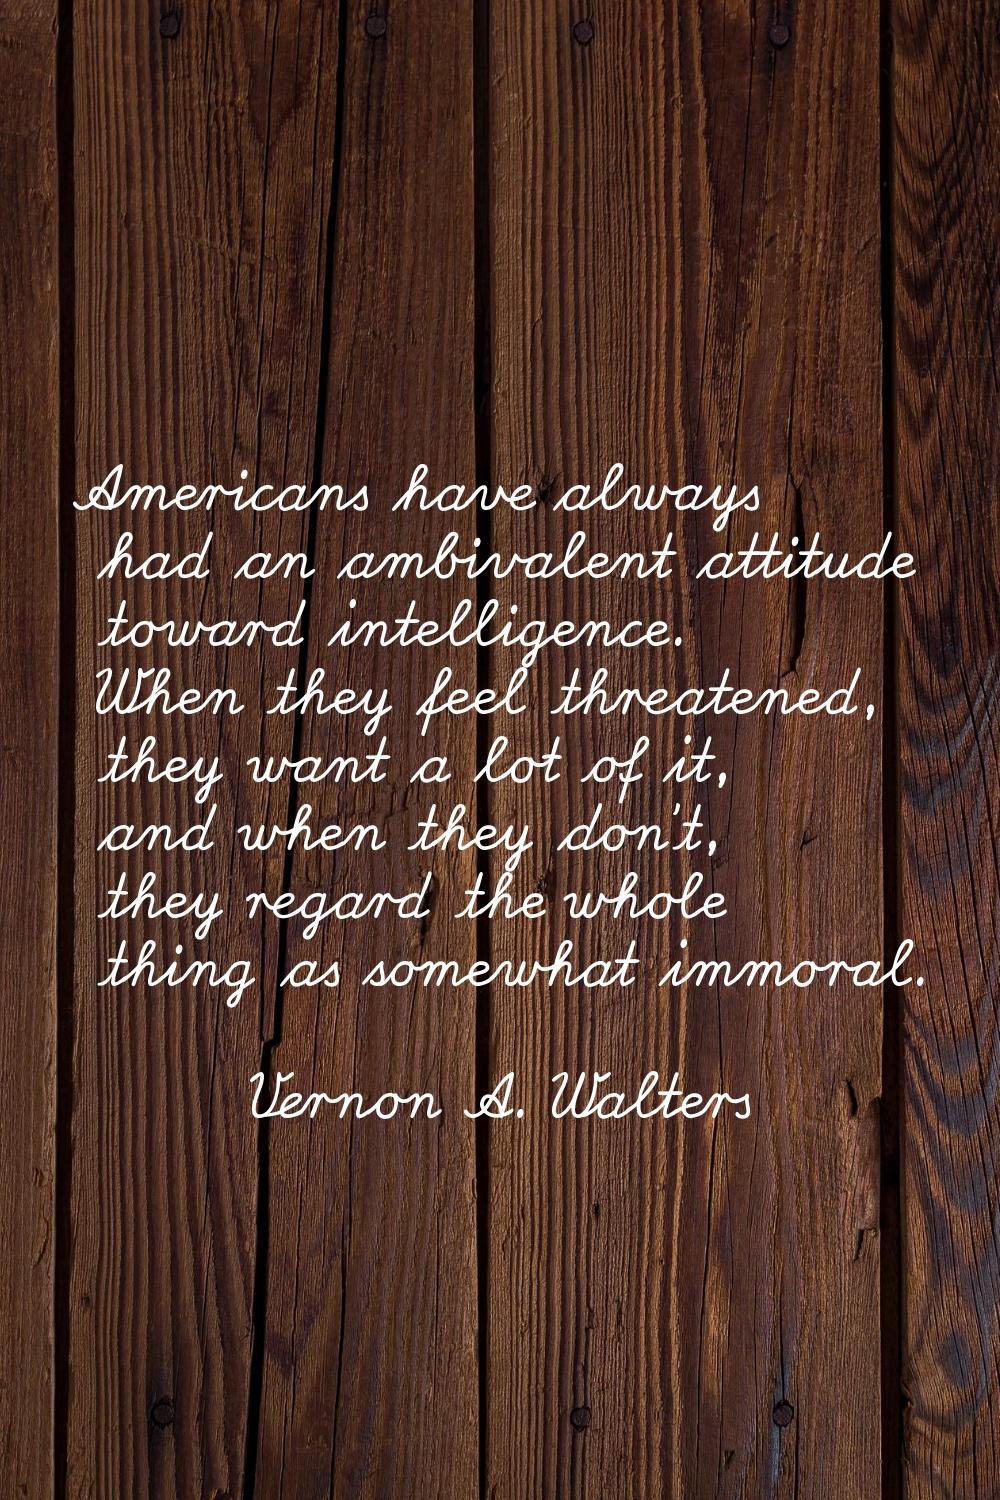 Americans have always had an ambivalent attitude toward intelligence. When they feel threatened, th